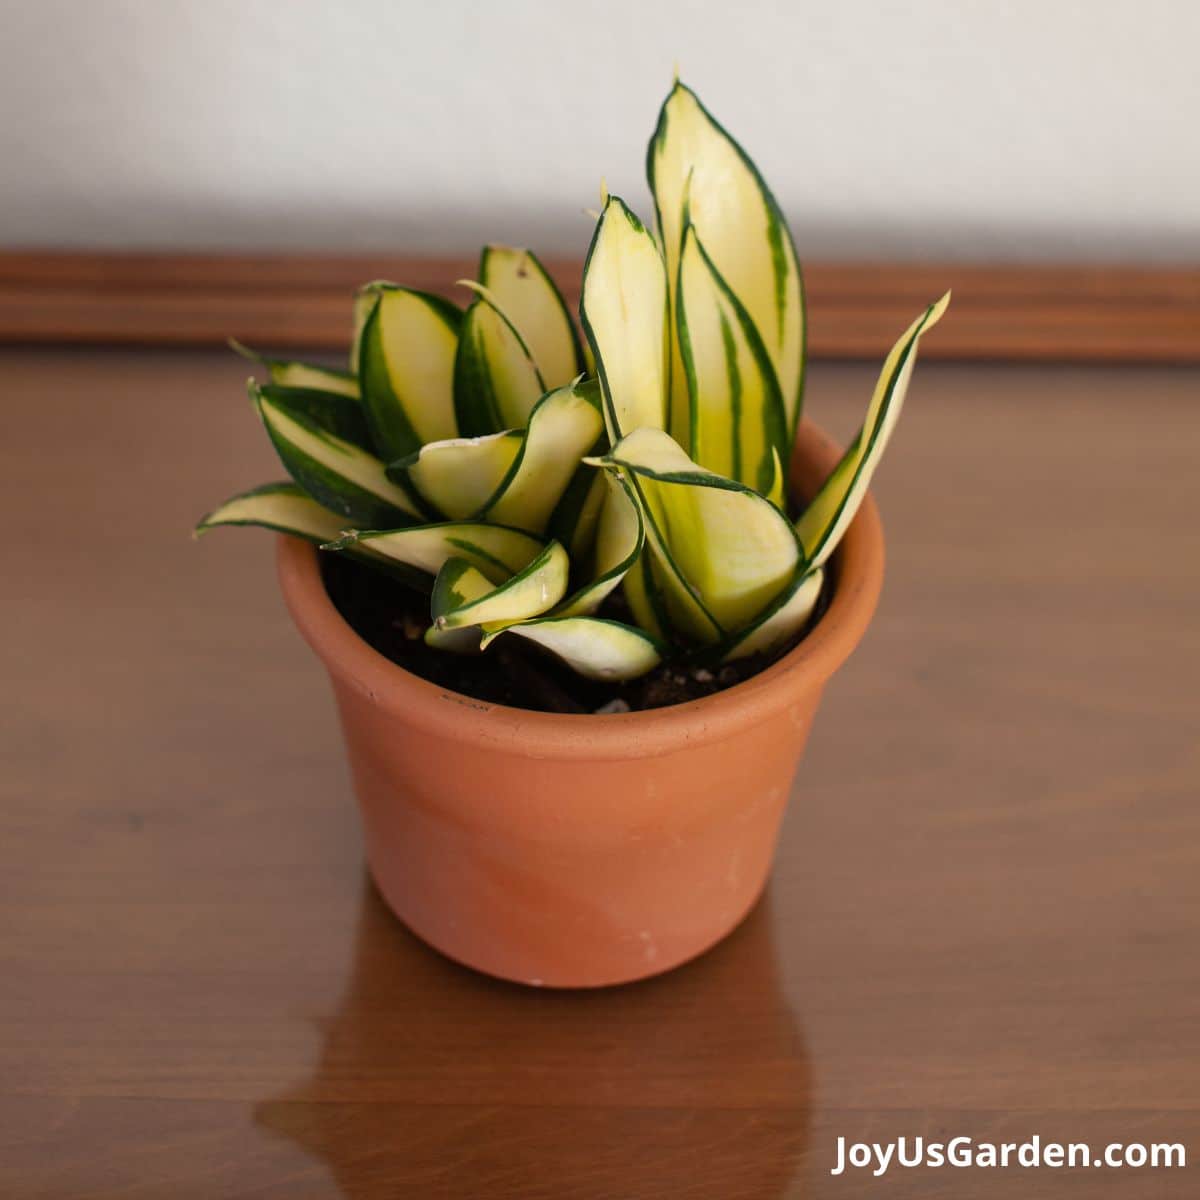 Sansevieria Gold Star shown indoors in a terracotta pot, foliage is variegated with yellow and green leaves. 